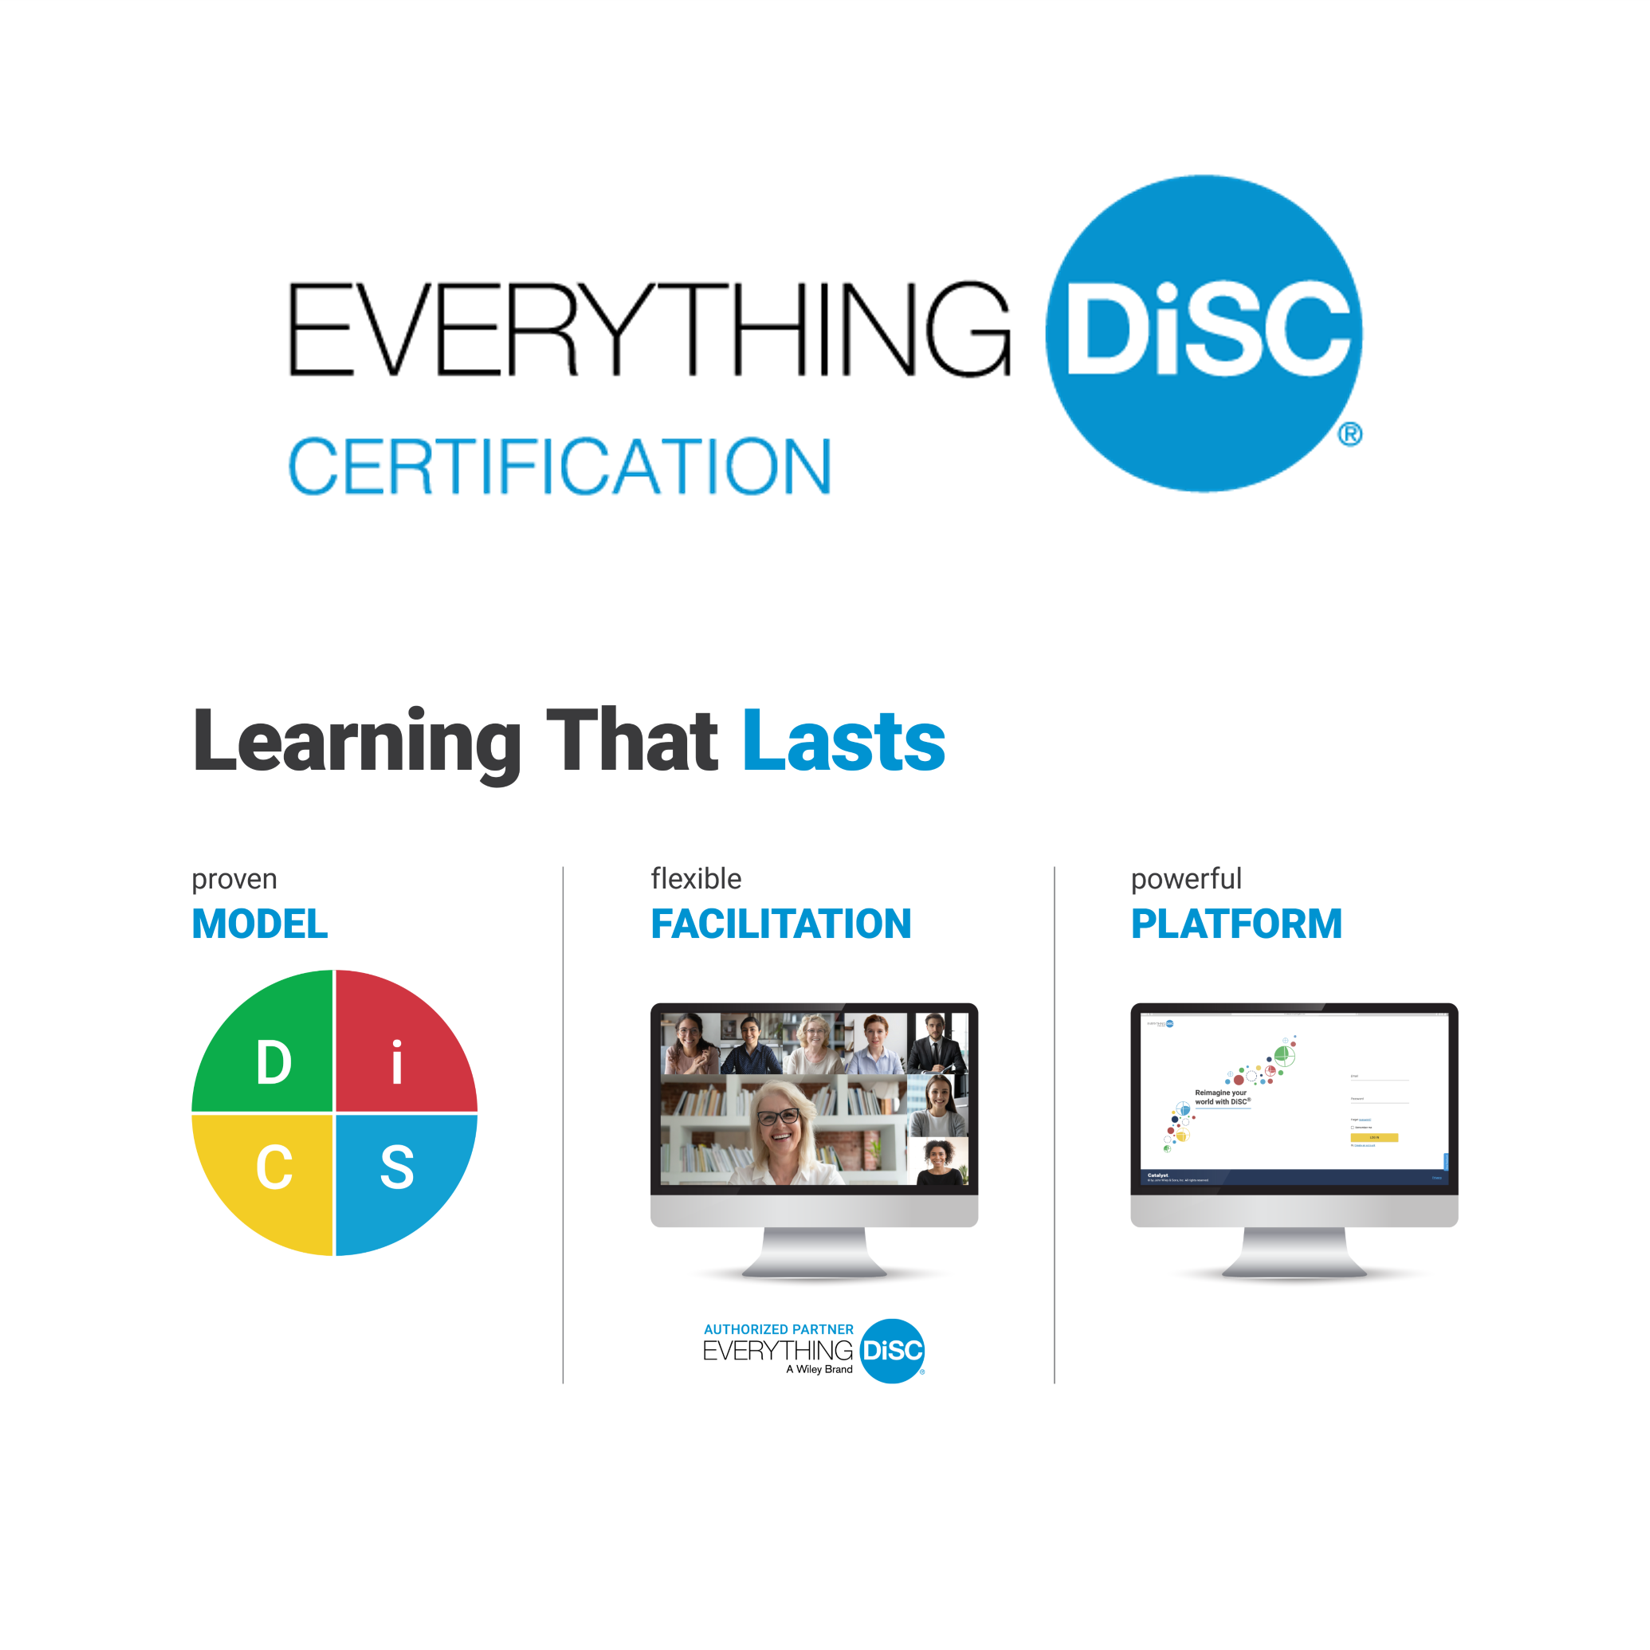 Online DiSC Certification for $1,795 | Get Certified Now!